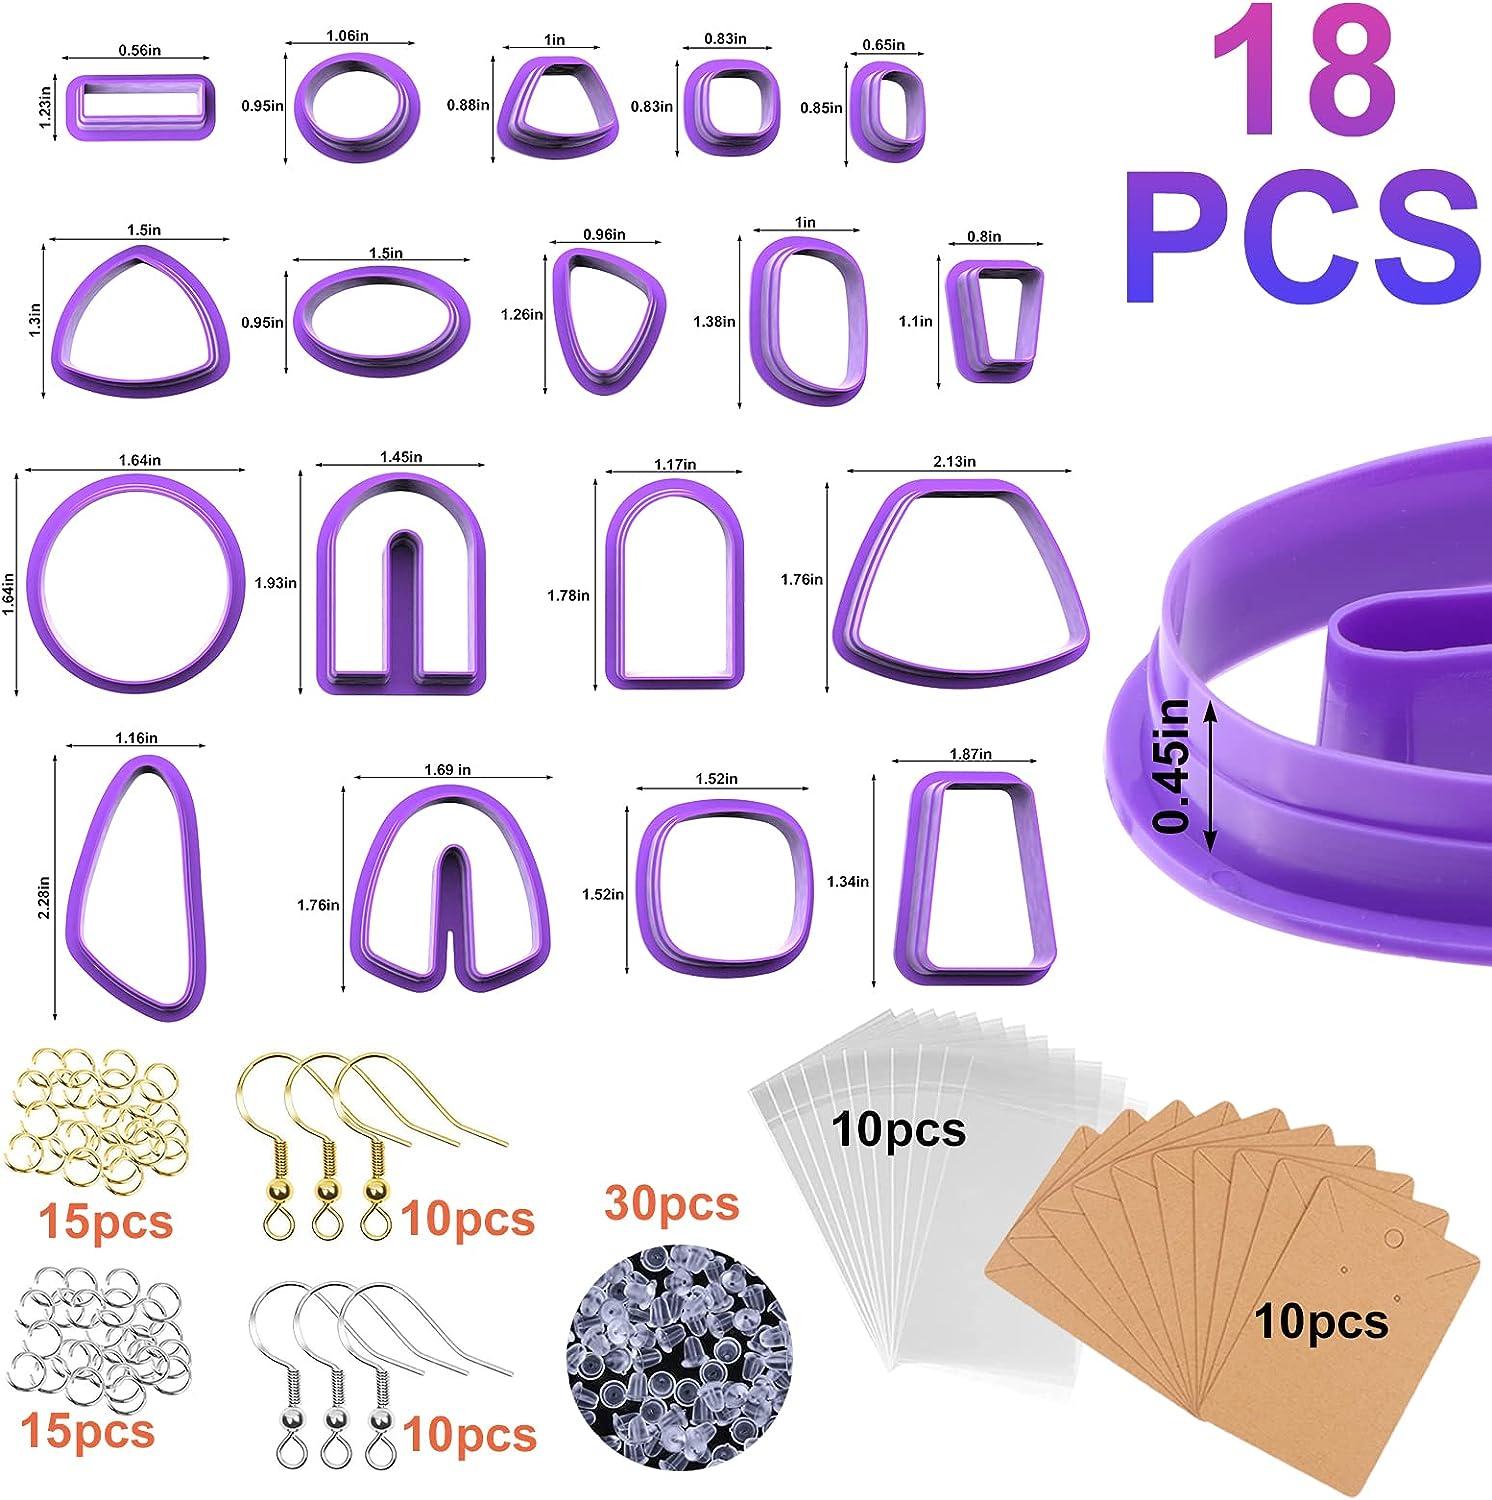 Polymer Clay Cutters  Polymer Clay Earring Kit With 18 Shapes Of Clay